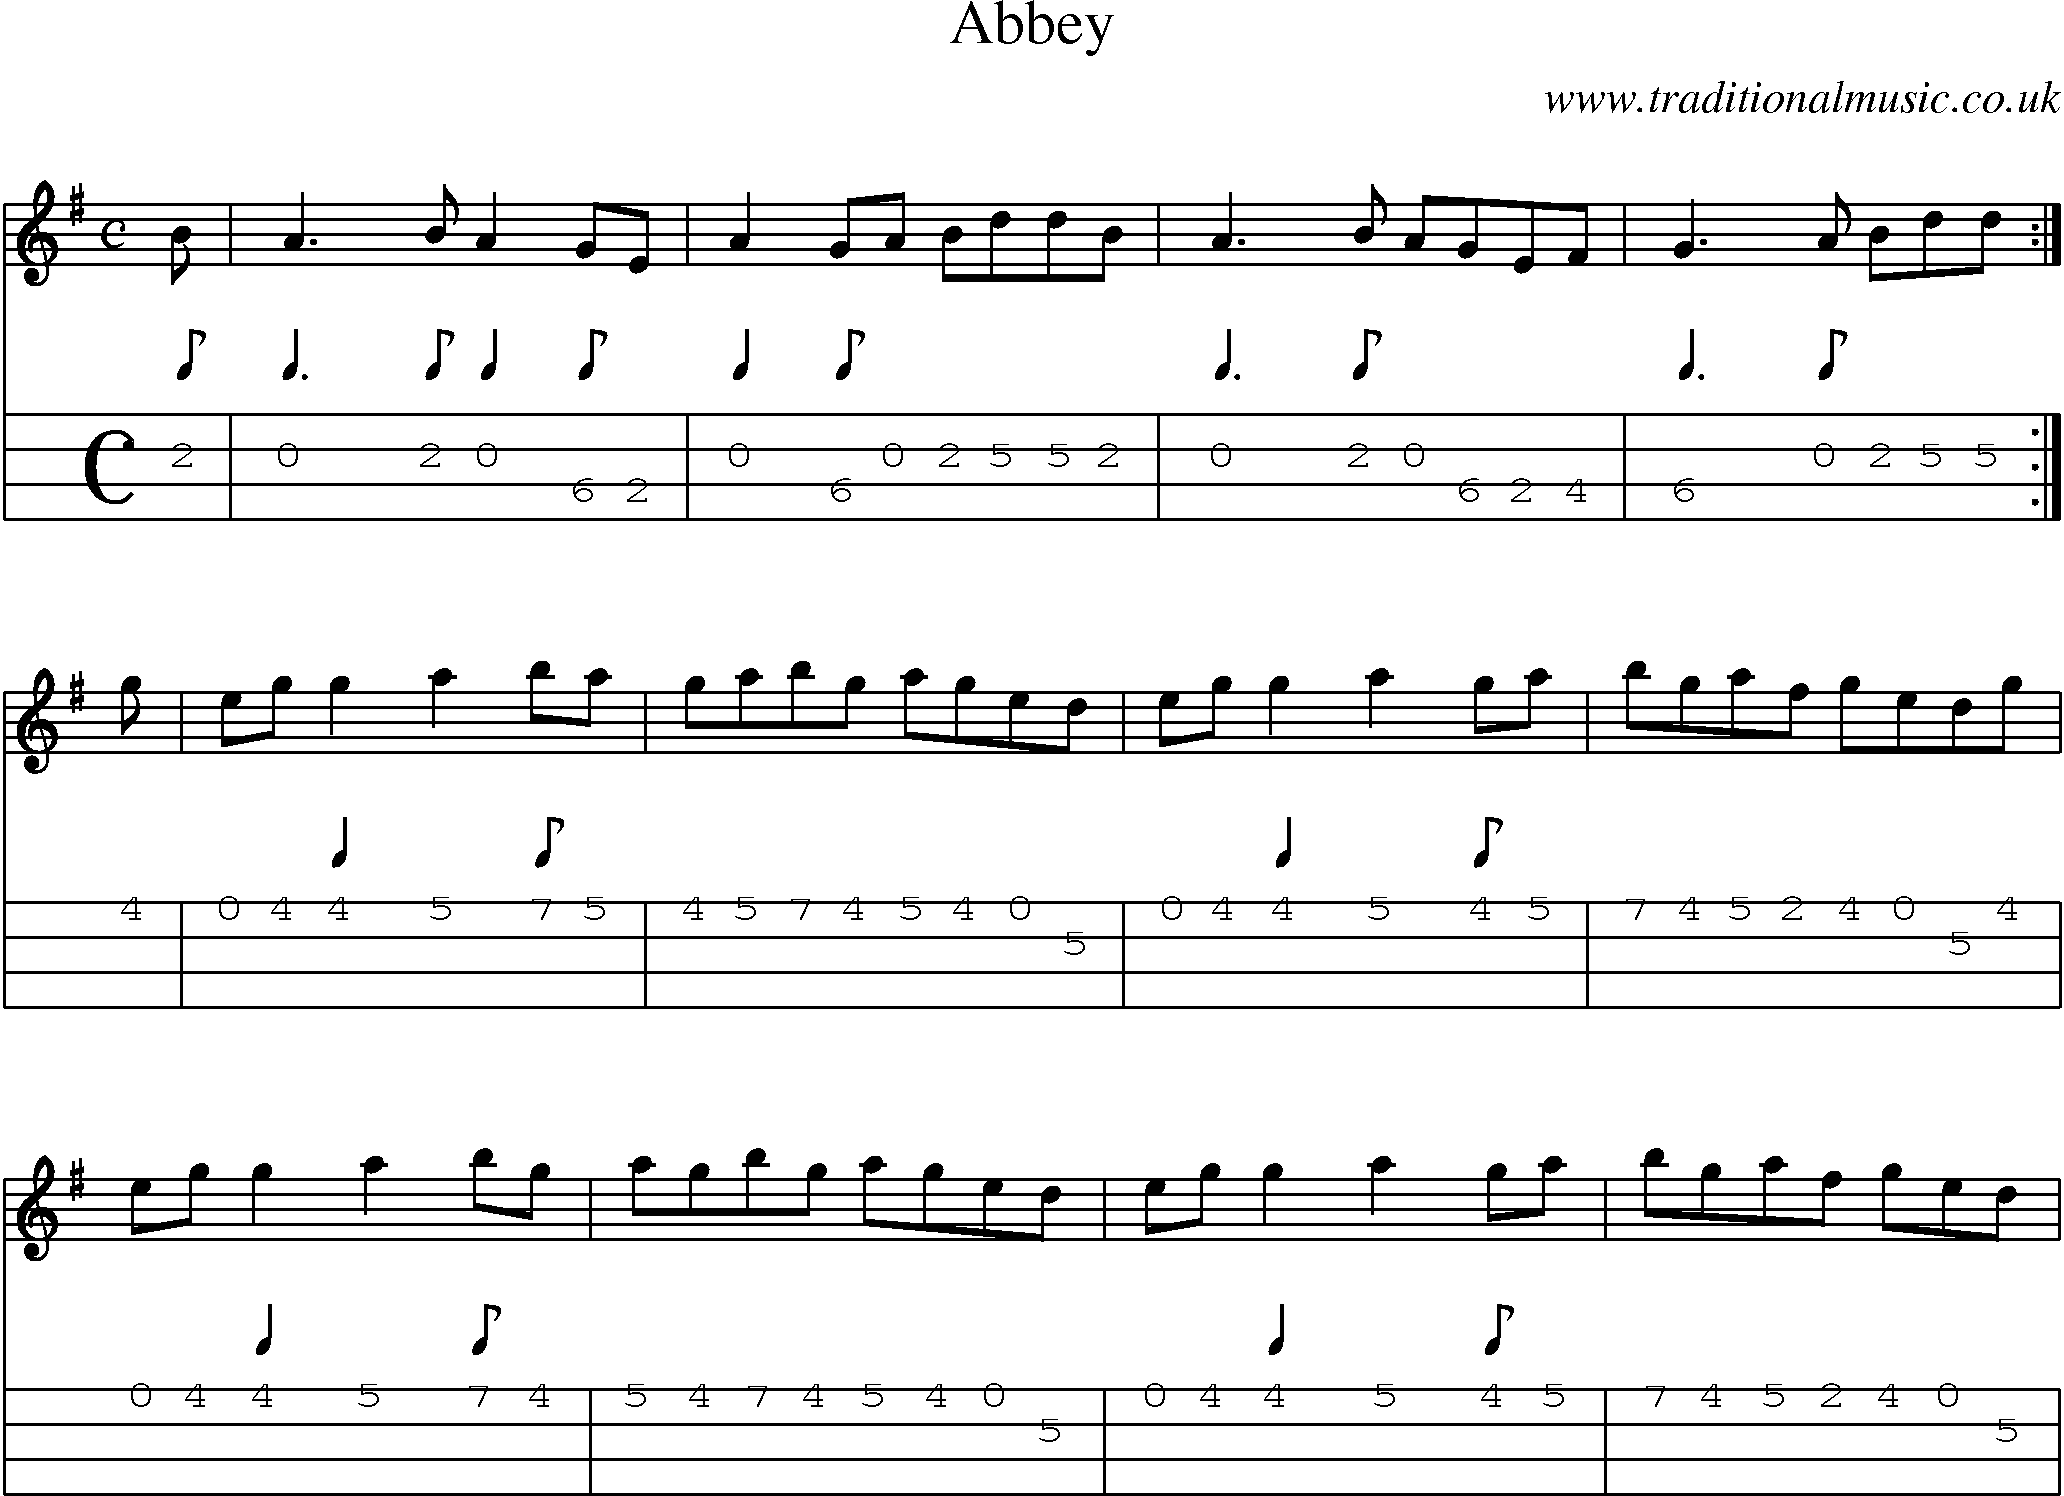 Music Score and Mandolin Tabs for Abbey